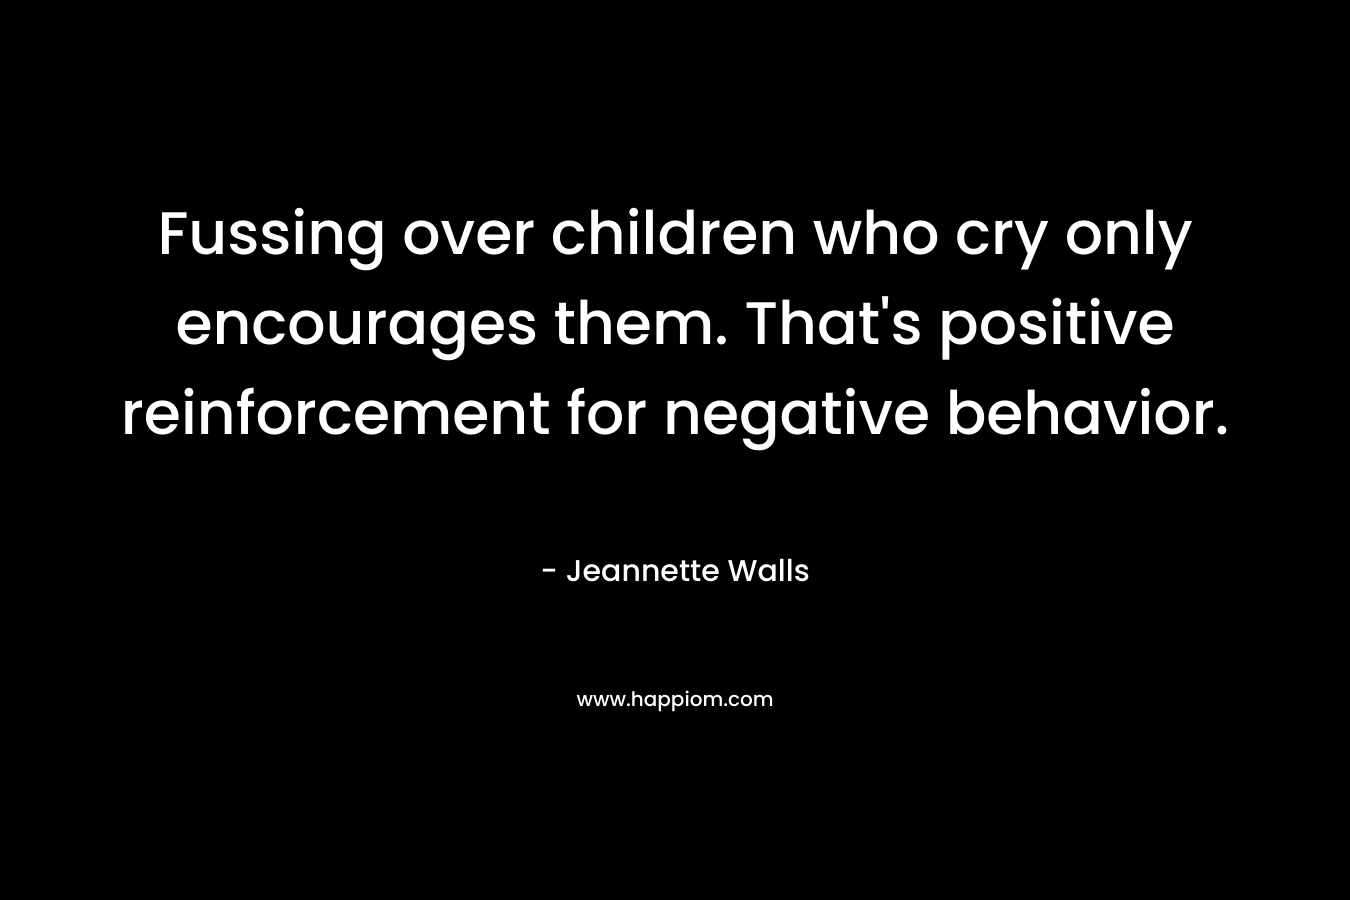 Fussing over children who cry only encourages them. That’s positive reinforcement for negative behavior. – Jeannette Walls